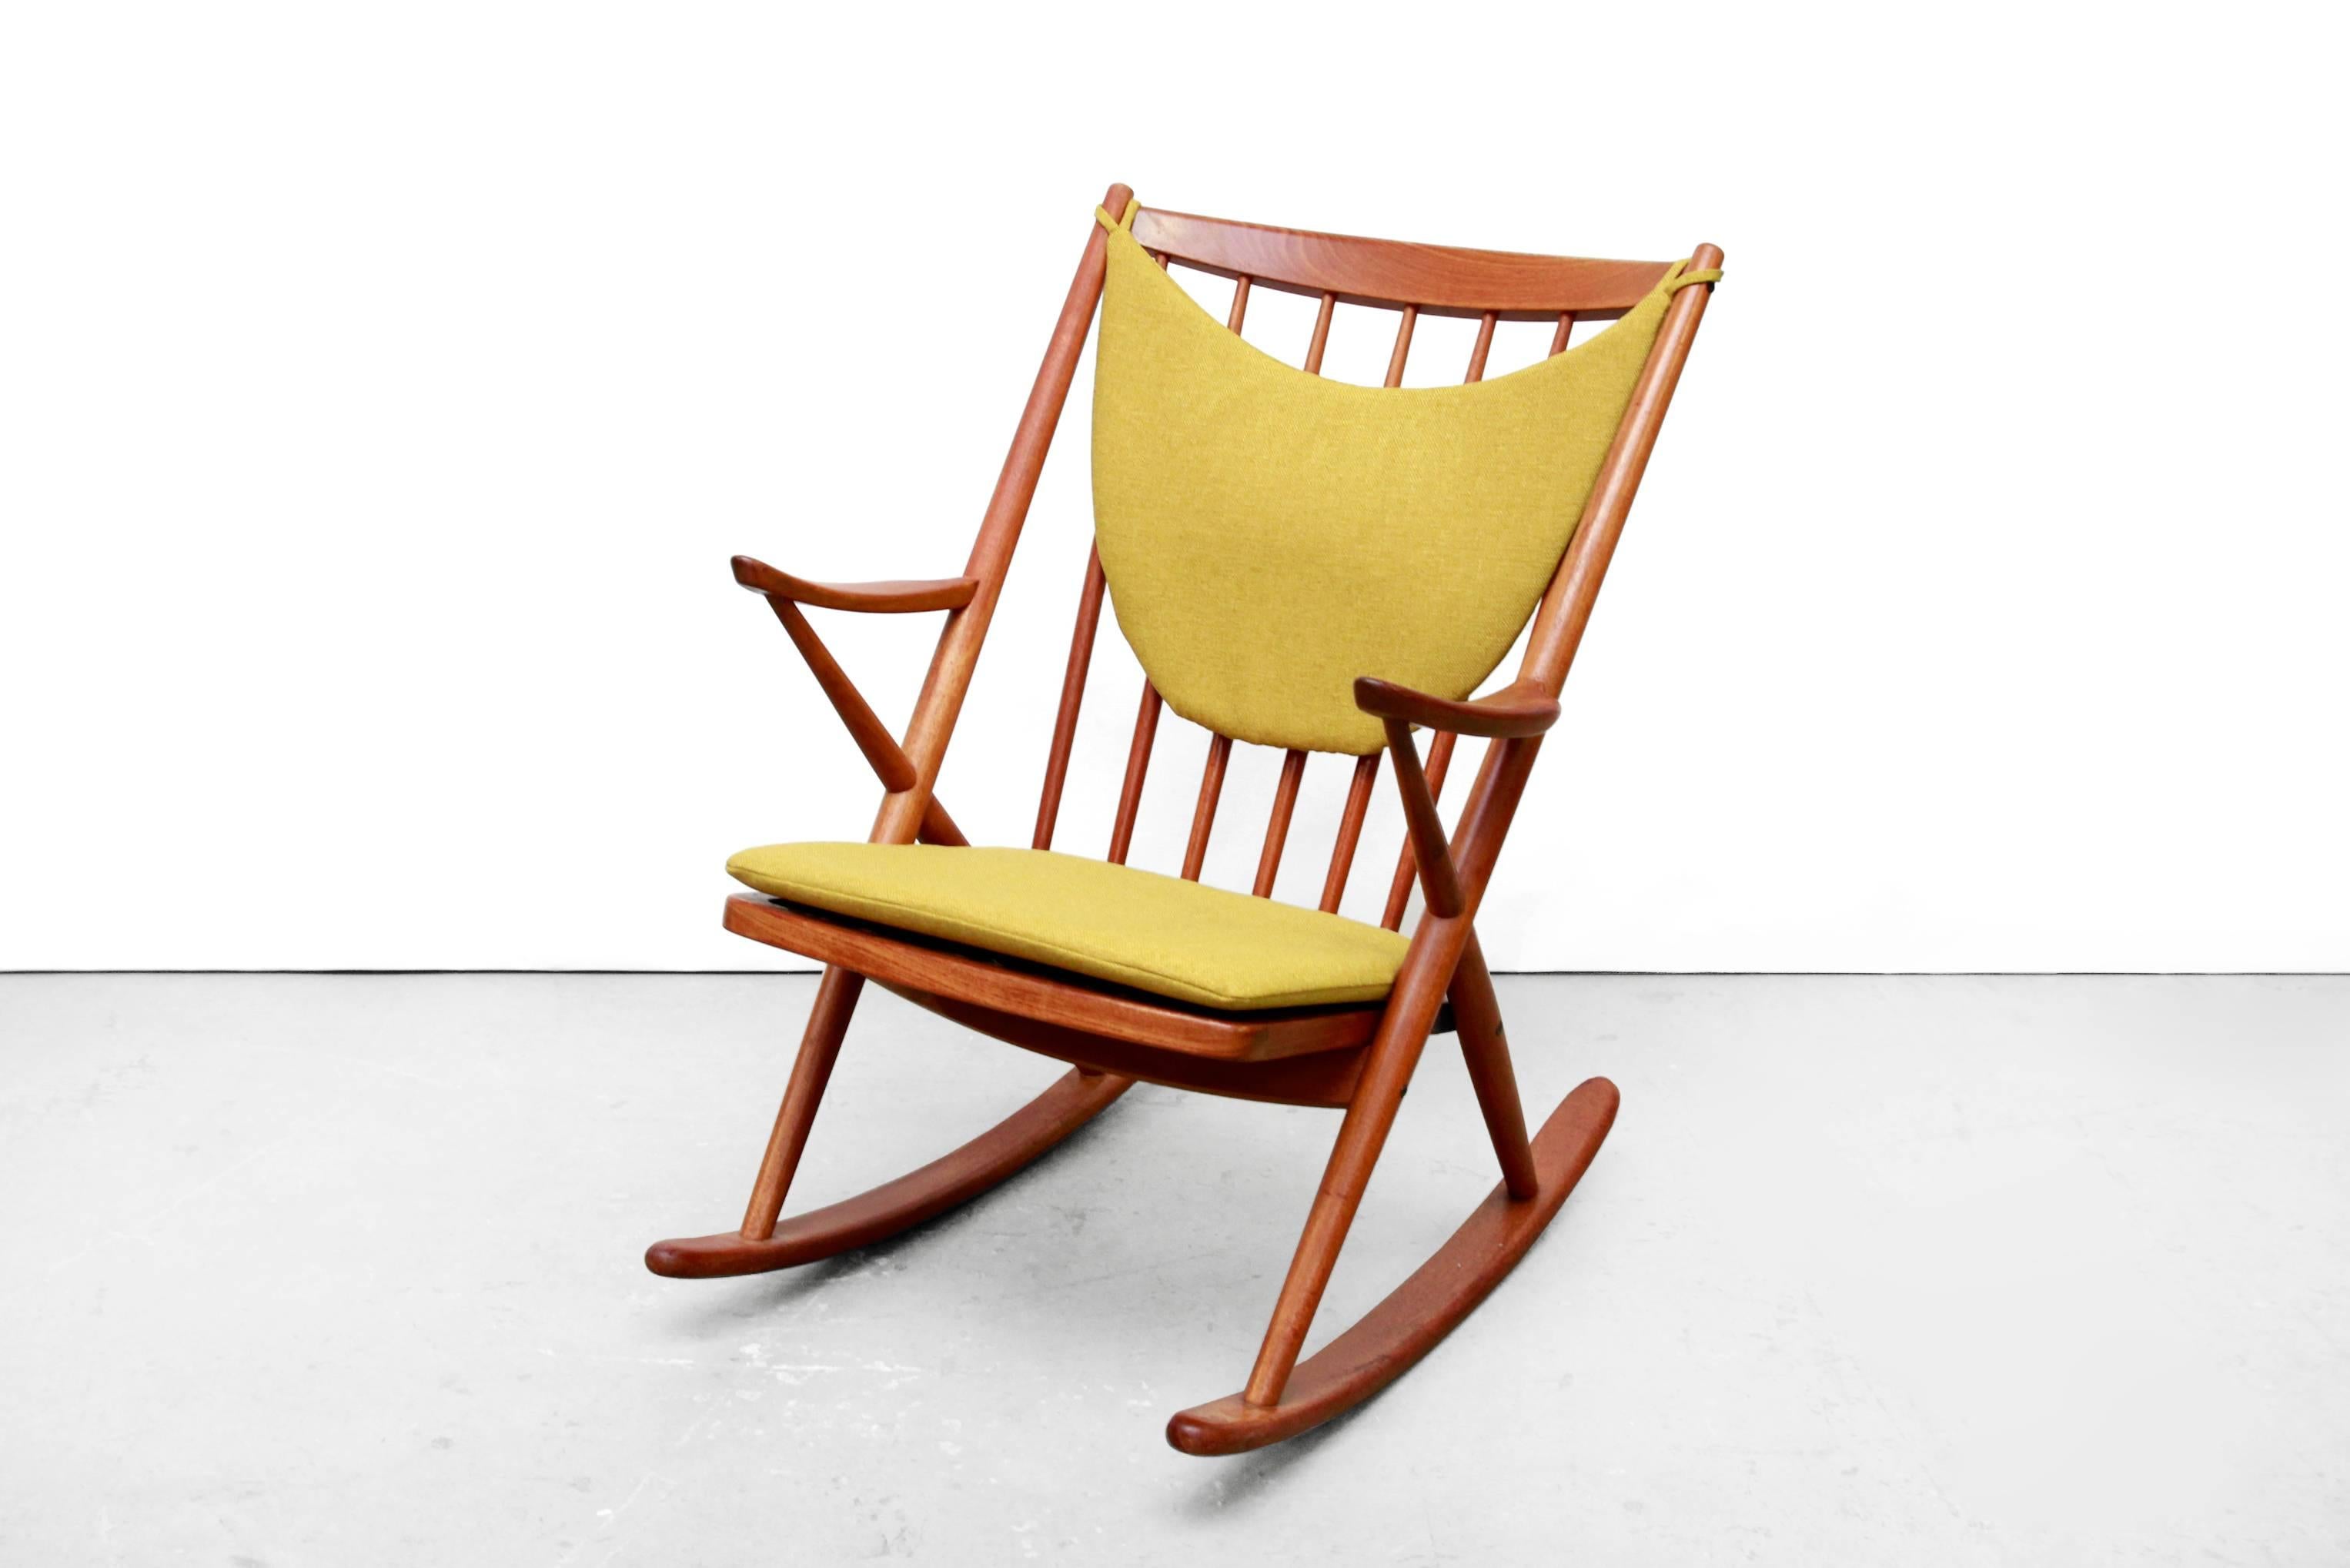 This rocking chair was designed by Frank Reenskaug in 1958 for Bramin Denmark. It is made from solid teak and features a mustard yellow seat and back cushion. The armchair with high backrest and slightly curved armrests is very comfortable. The